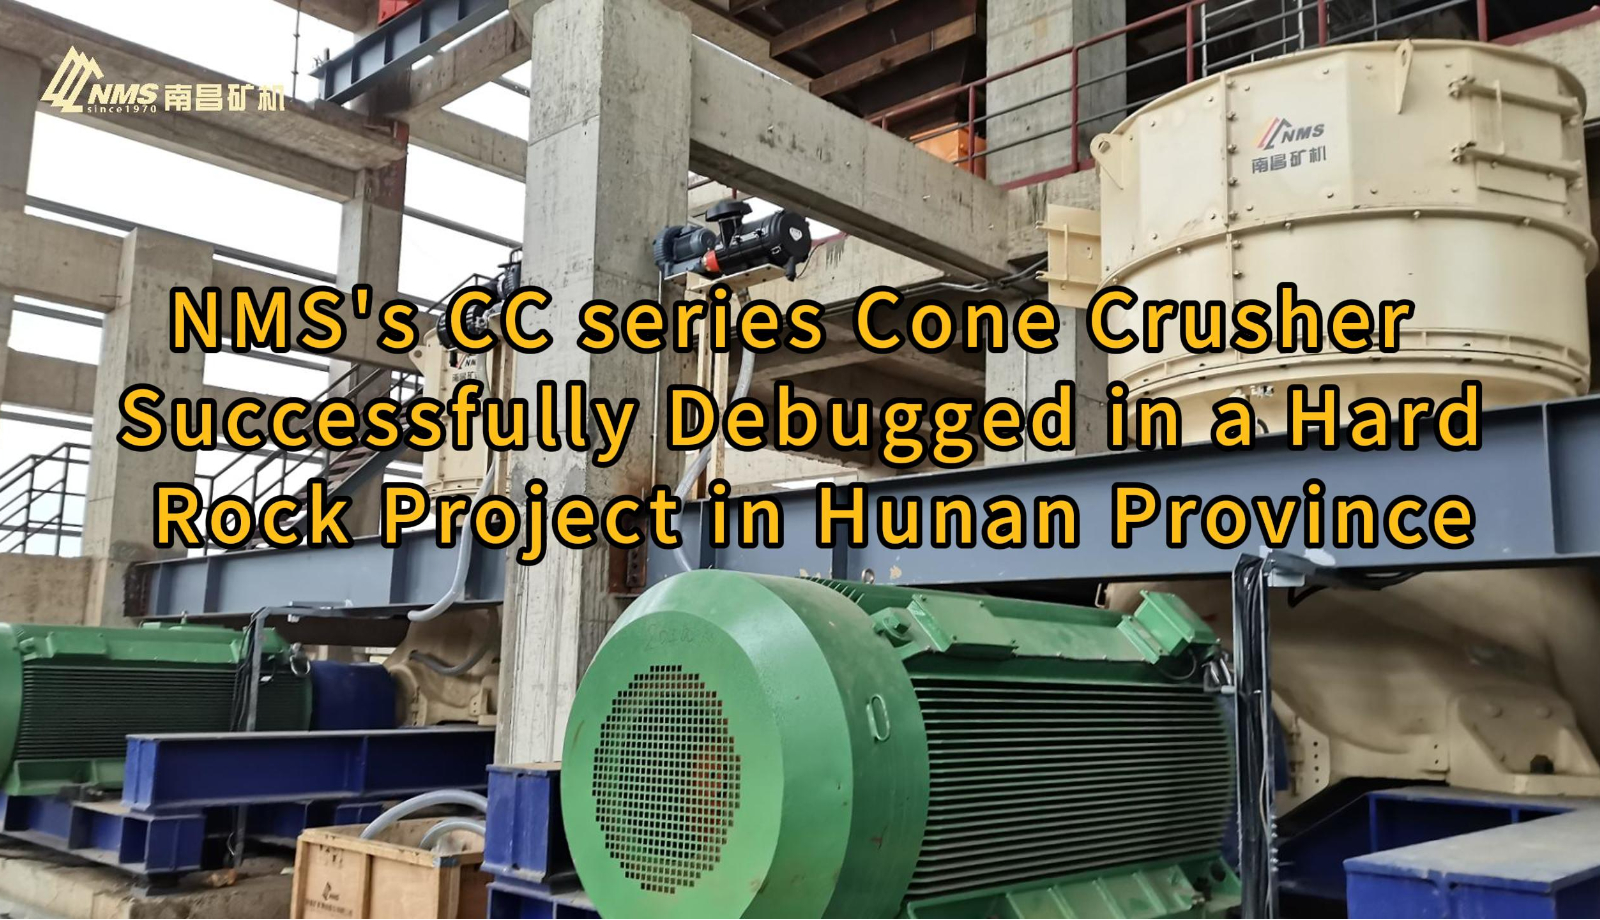 NMS's CC series Cone Crusher Successfully Debugged in a Hard Rock Project in Hunan Province